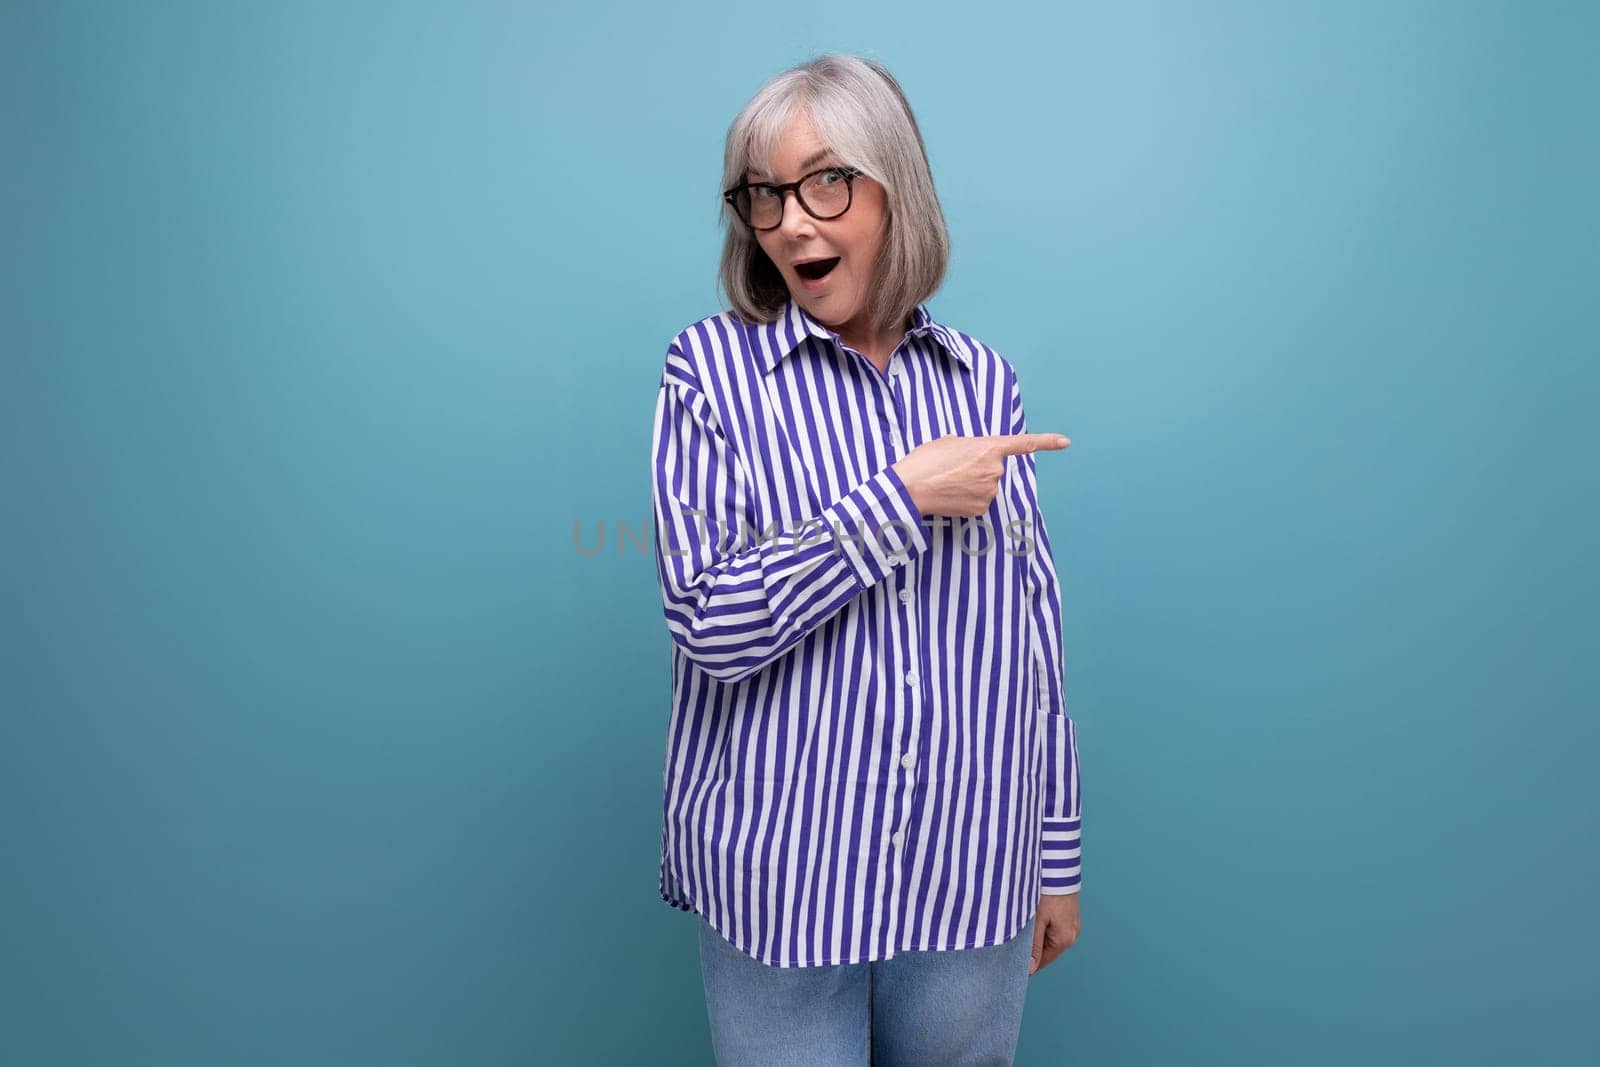 surprised middle-aged youth lady with gray hair on a bright studio background with copy space.